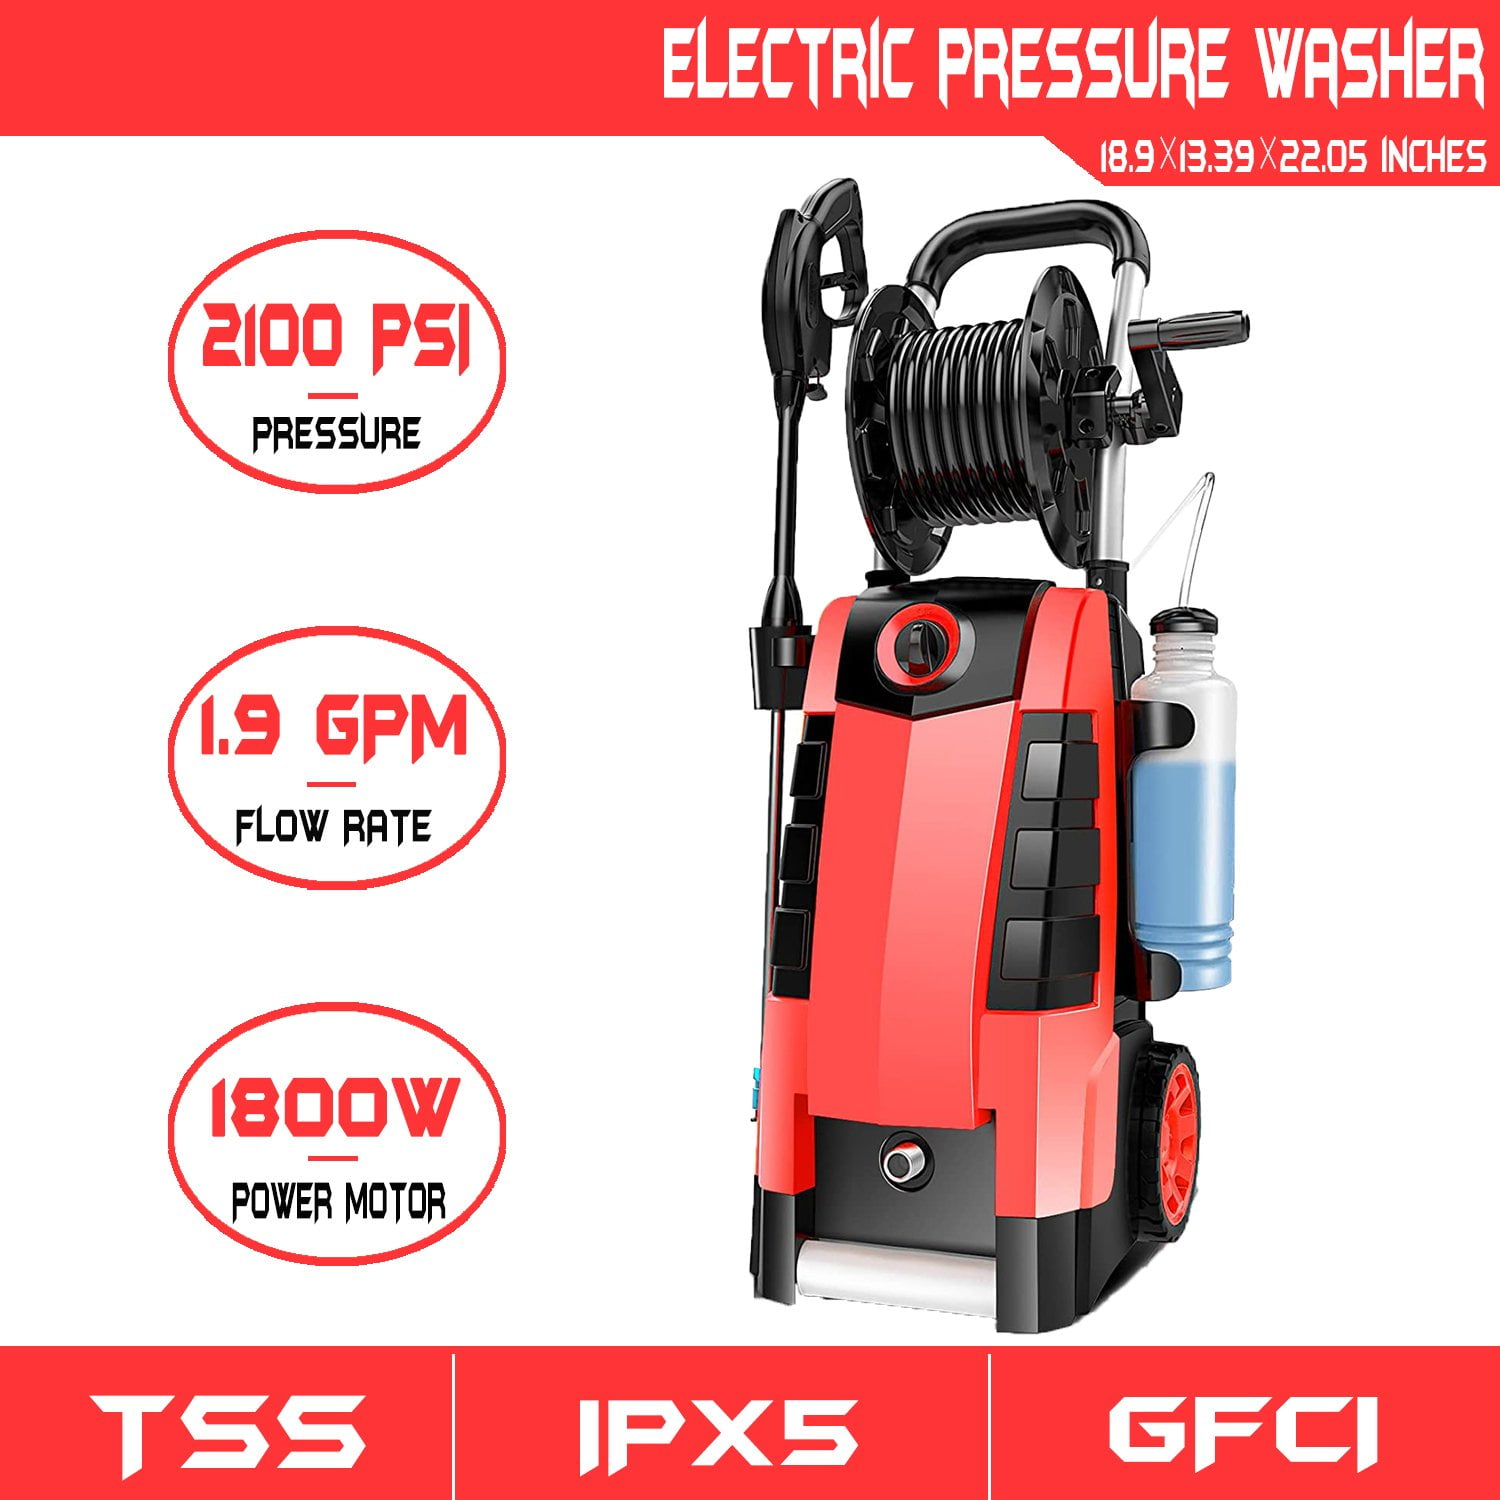 2100 PSI Electric High Pressure Washer,1.9GPM 1800W High Power Cleaner Machine,5 Adjustable Nozzle Hose Reel